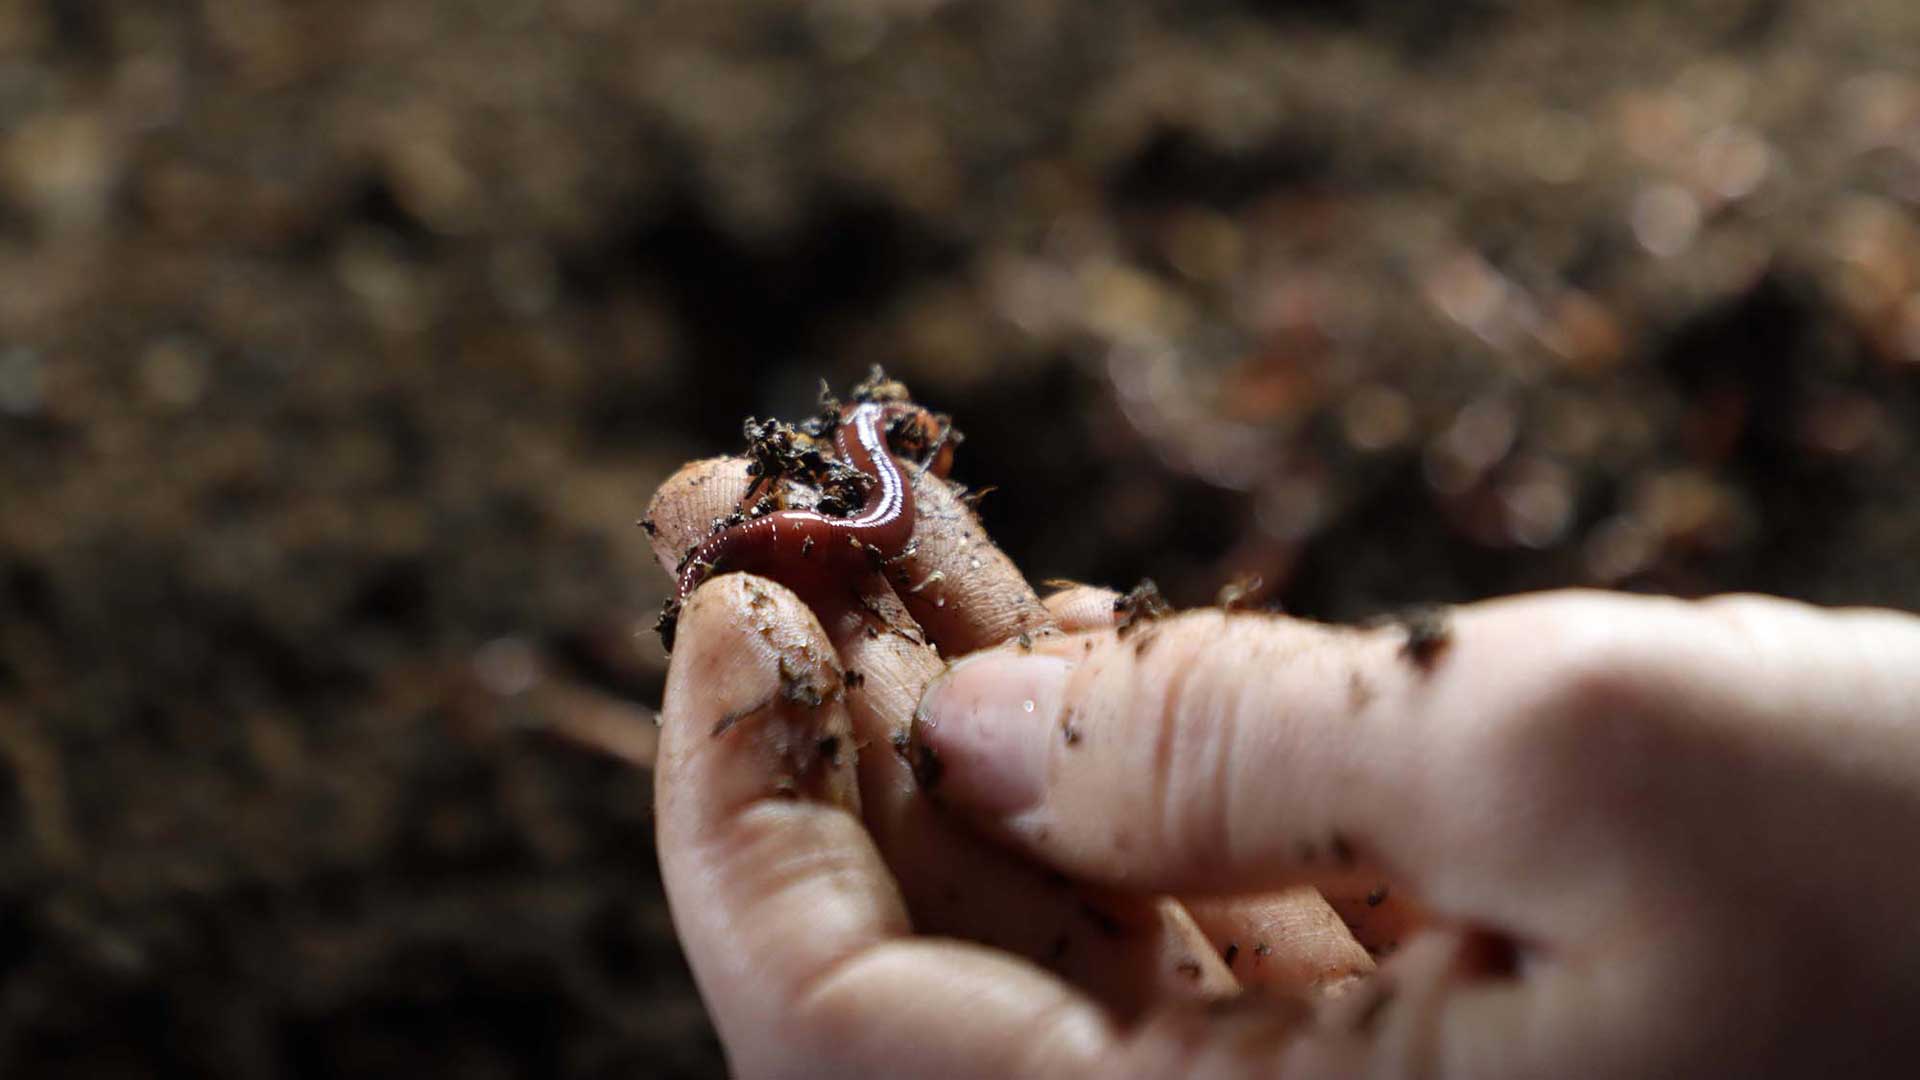 Red wiggler worms are used for vermicomposting to repurpose and dispose of food waste in a sustainable way. Photo taken at the Arizona Worm Farm in Phoenix on Feb. 1, 2023. 